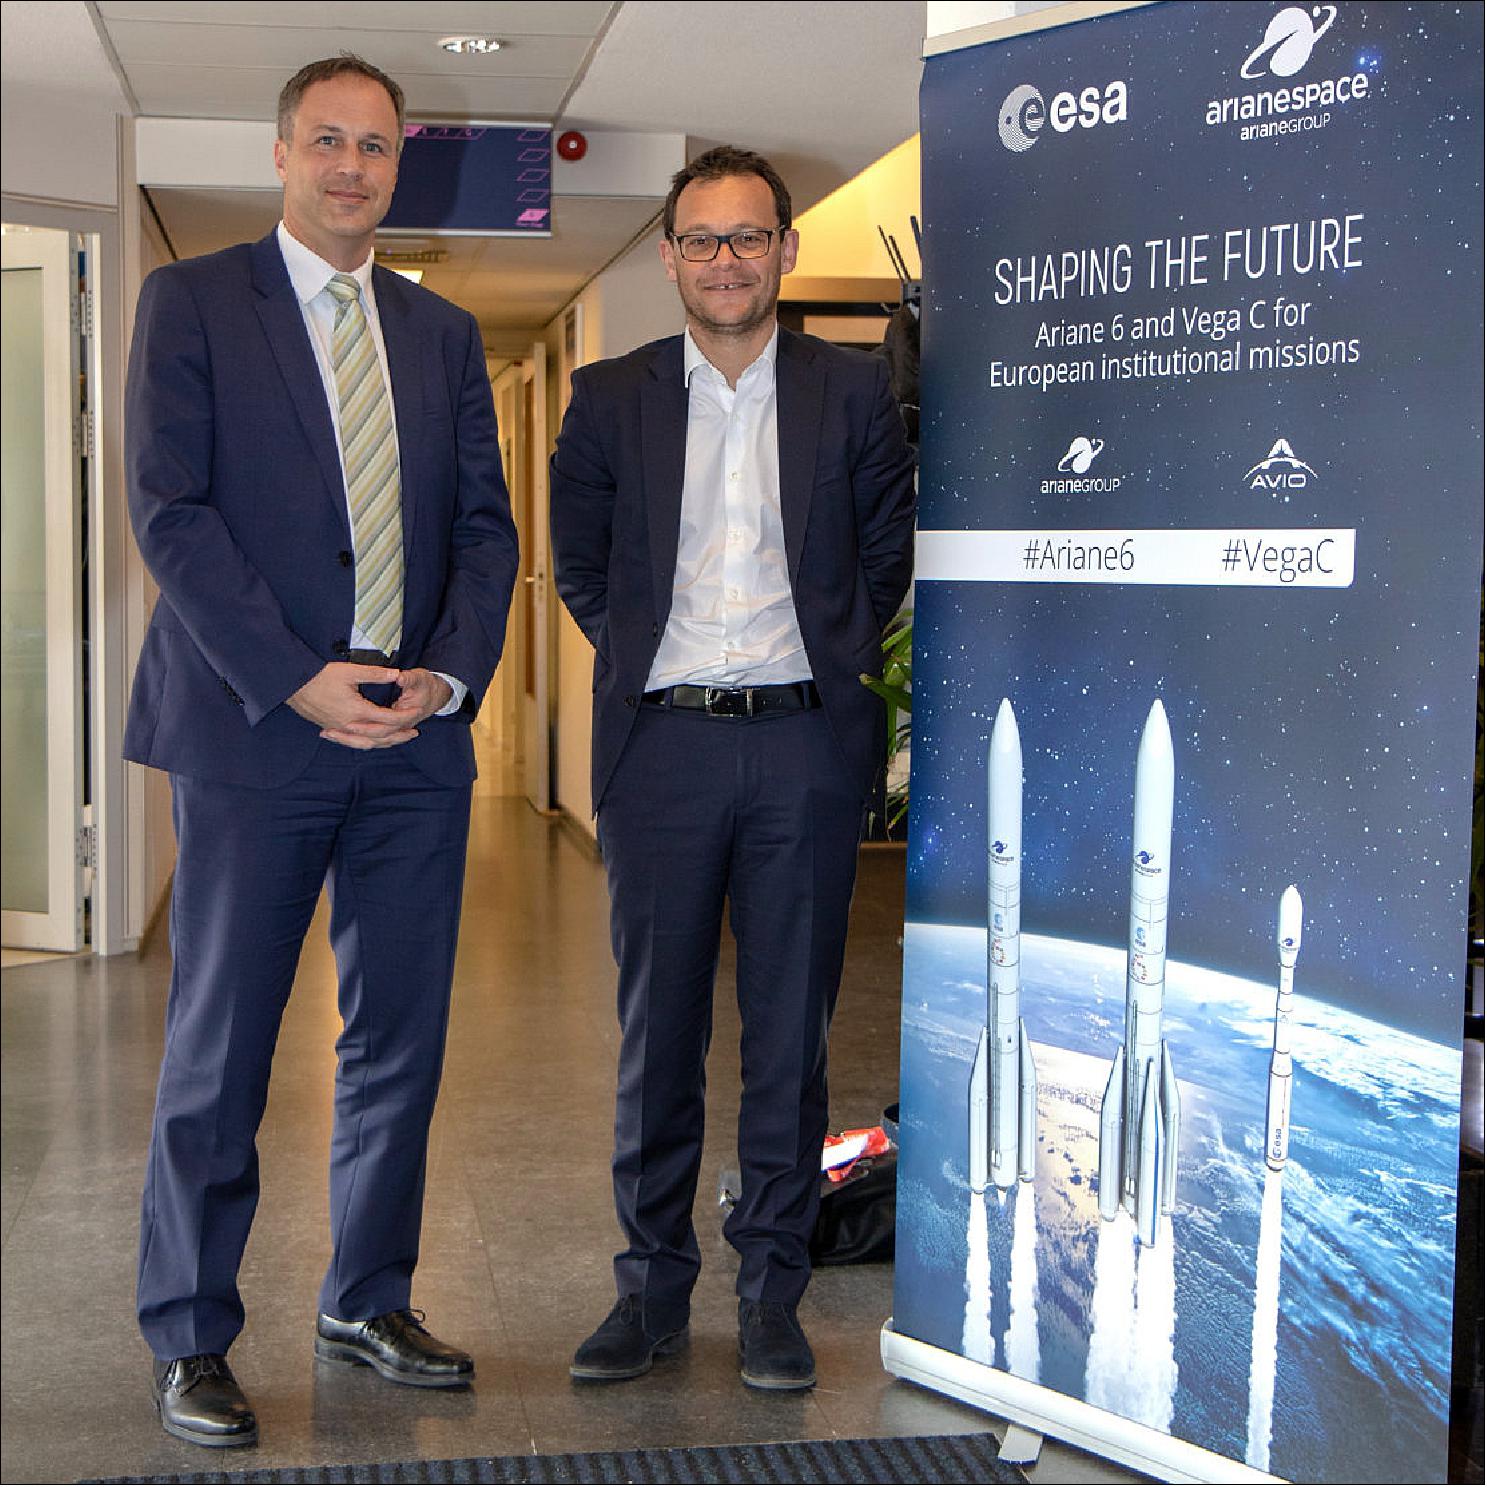 Figure 73: Daniel Neuenschwander, ESA’s Director of Space Transportation and Stéphane Israël, CEO at Arianespace welcomed about 100 attendees to a conference on Ariane 6 and Vega-C for institutional users at ESA/ESTEC in Noordwijk, the Netherlands on 4–5 April 2019 (image credit: ESA)